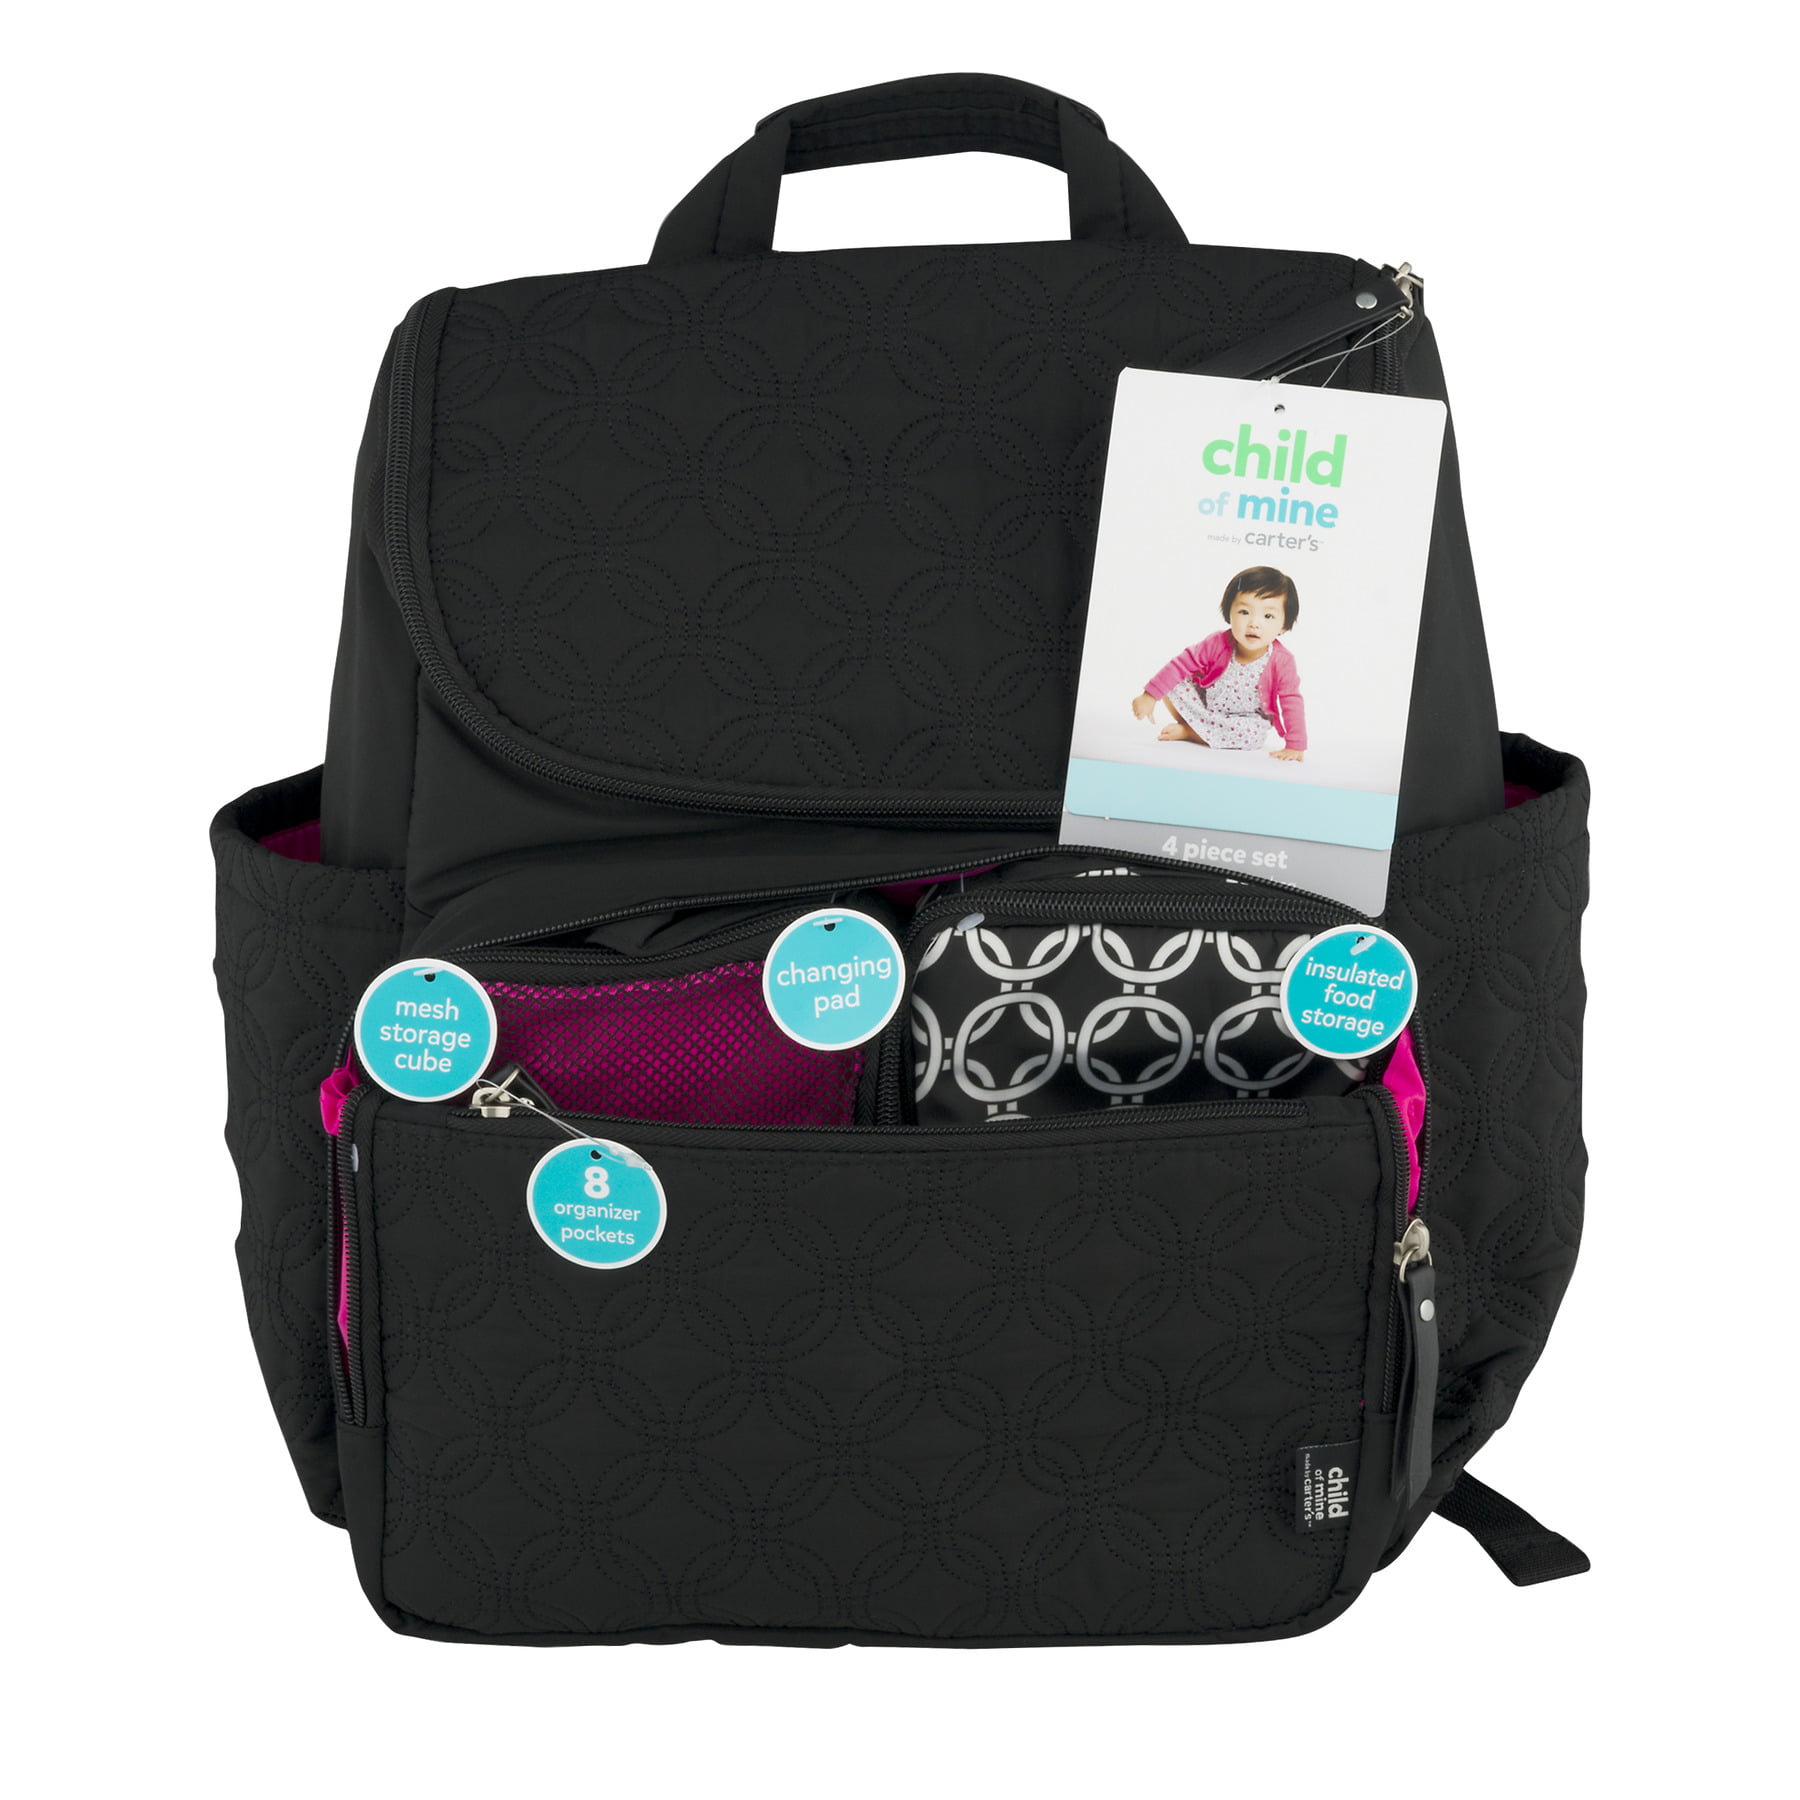 Child of Mine by Carter&#39;s Quilted Backpack Diaper Bag, Black - www.paulmartinsmith.com